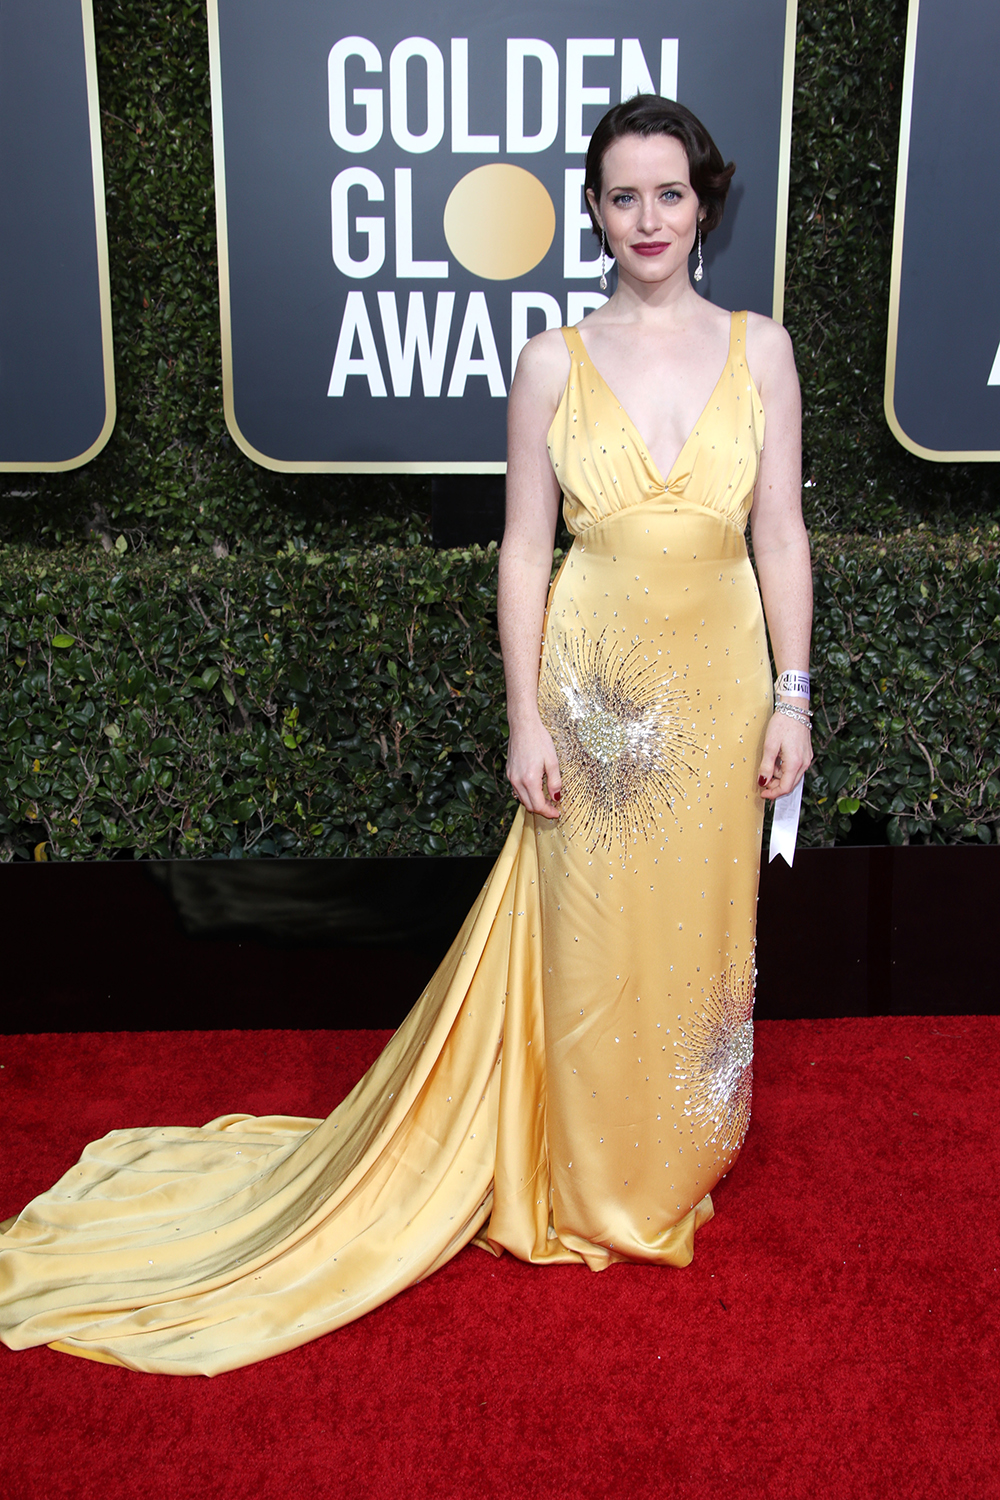 Mandatory Credit: Photo by Matt Baron/BEI/REX/Shutterstock (10048067ky) Claire Foy 76th Annual Golden Globe Awards, Arrivals, Los Angeles, USA - 06 Jan 2019